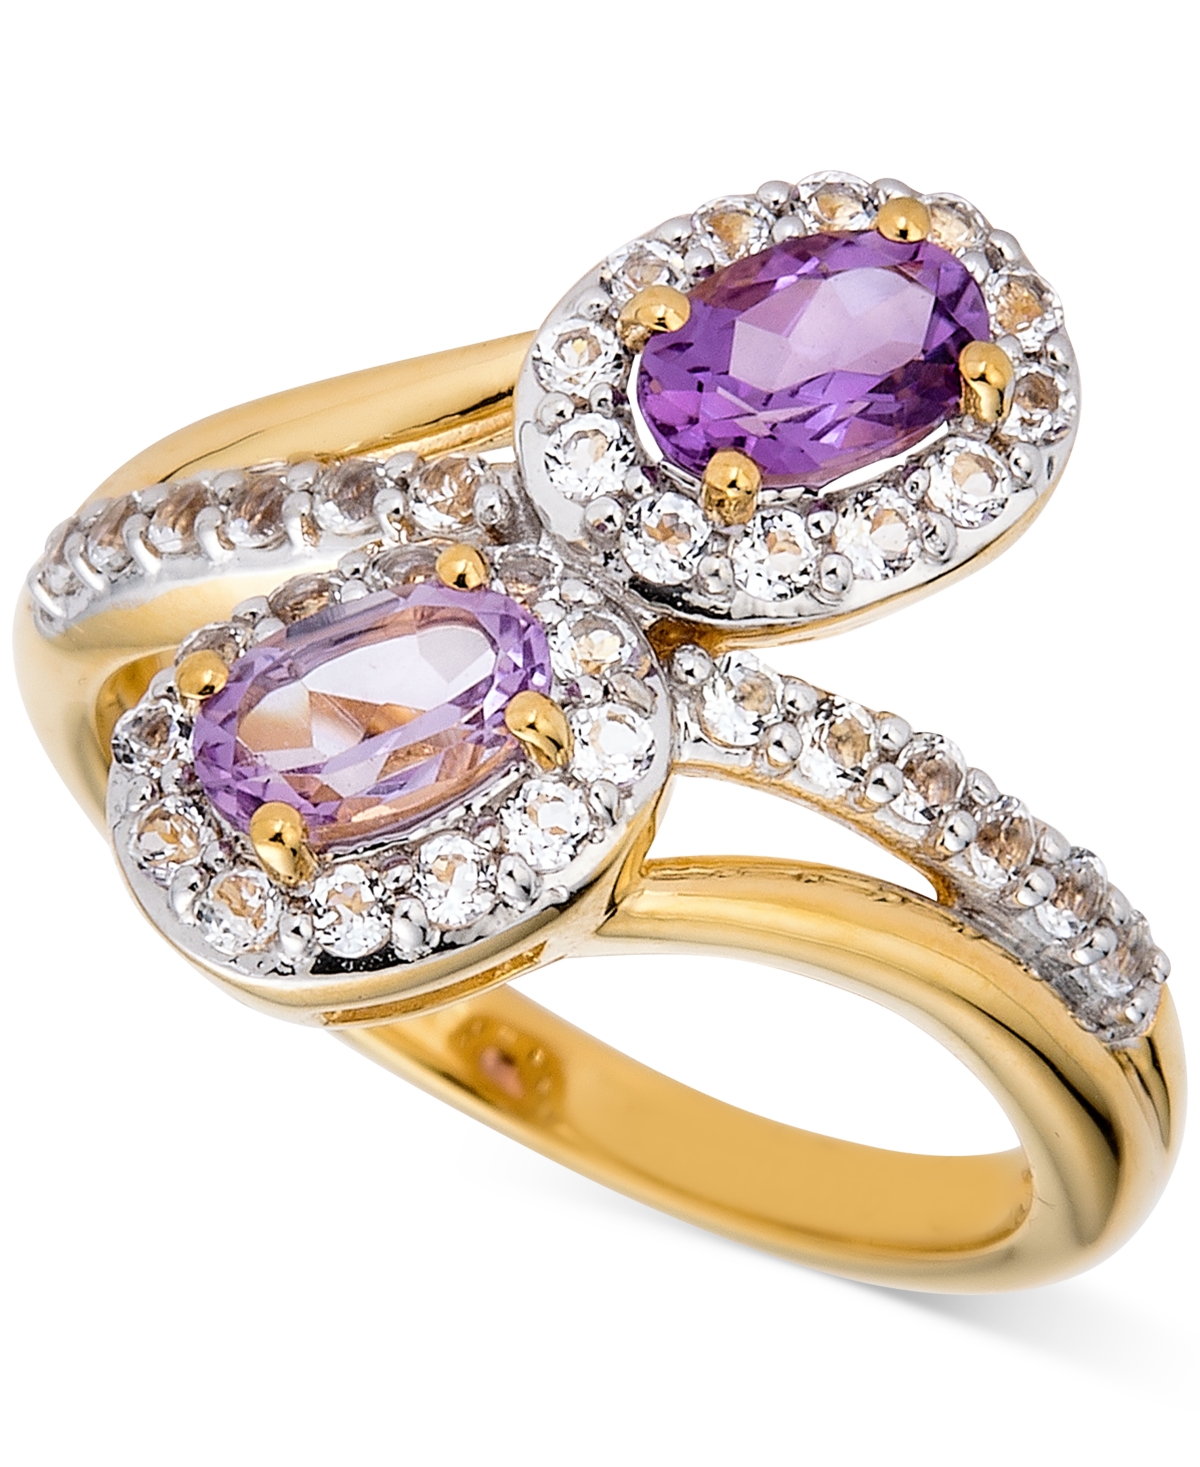 Amethyst (3/4 ct. t.w.) & White Topaz (5/8 ct. t.w.) Bypass Ring in 14k Gold-Plated Sterling Silver (Also in Additional Gemstones) - Citrine/White Top